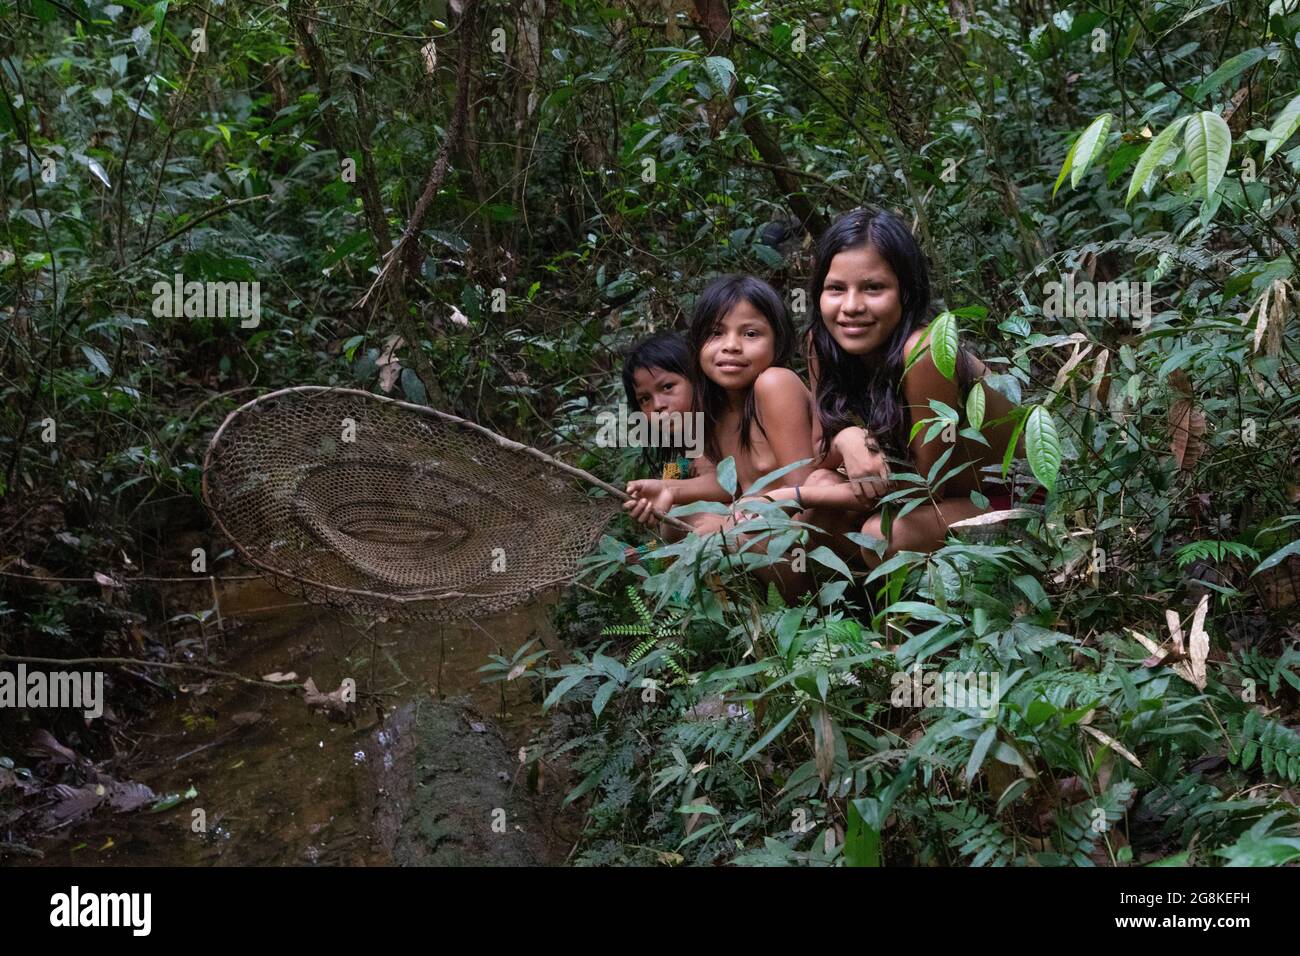 Three girls stood with a fishing net next to the river. AMAZONIAN ECUADOR: In one image, a woman wore red makeup across her eyes and a feathered headd Stock Photo